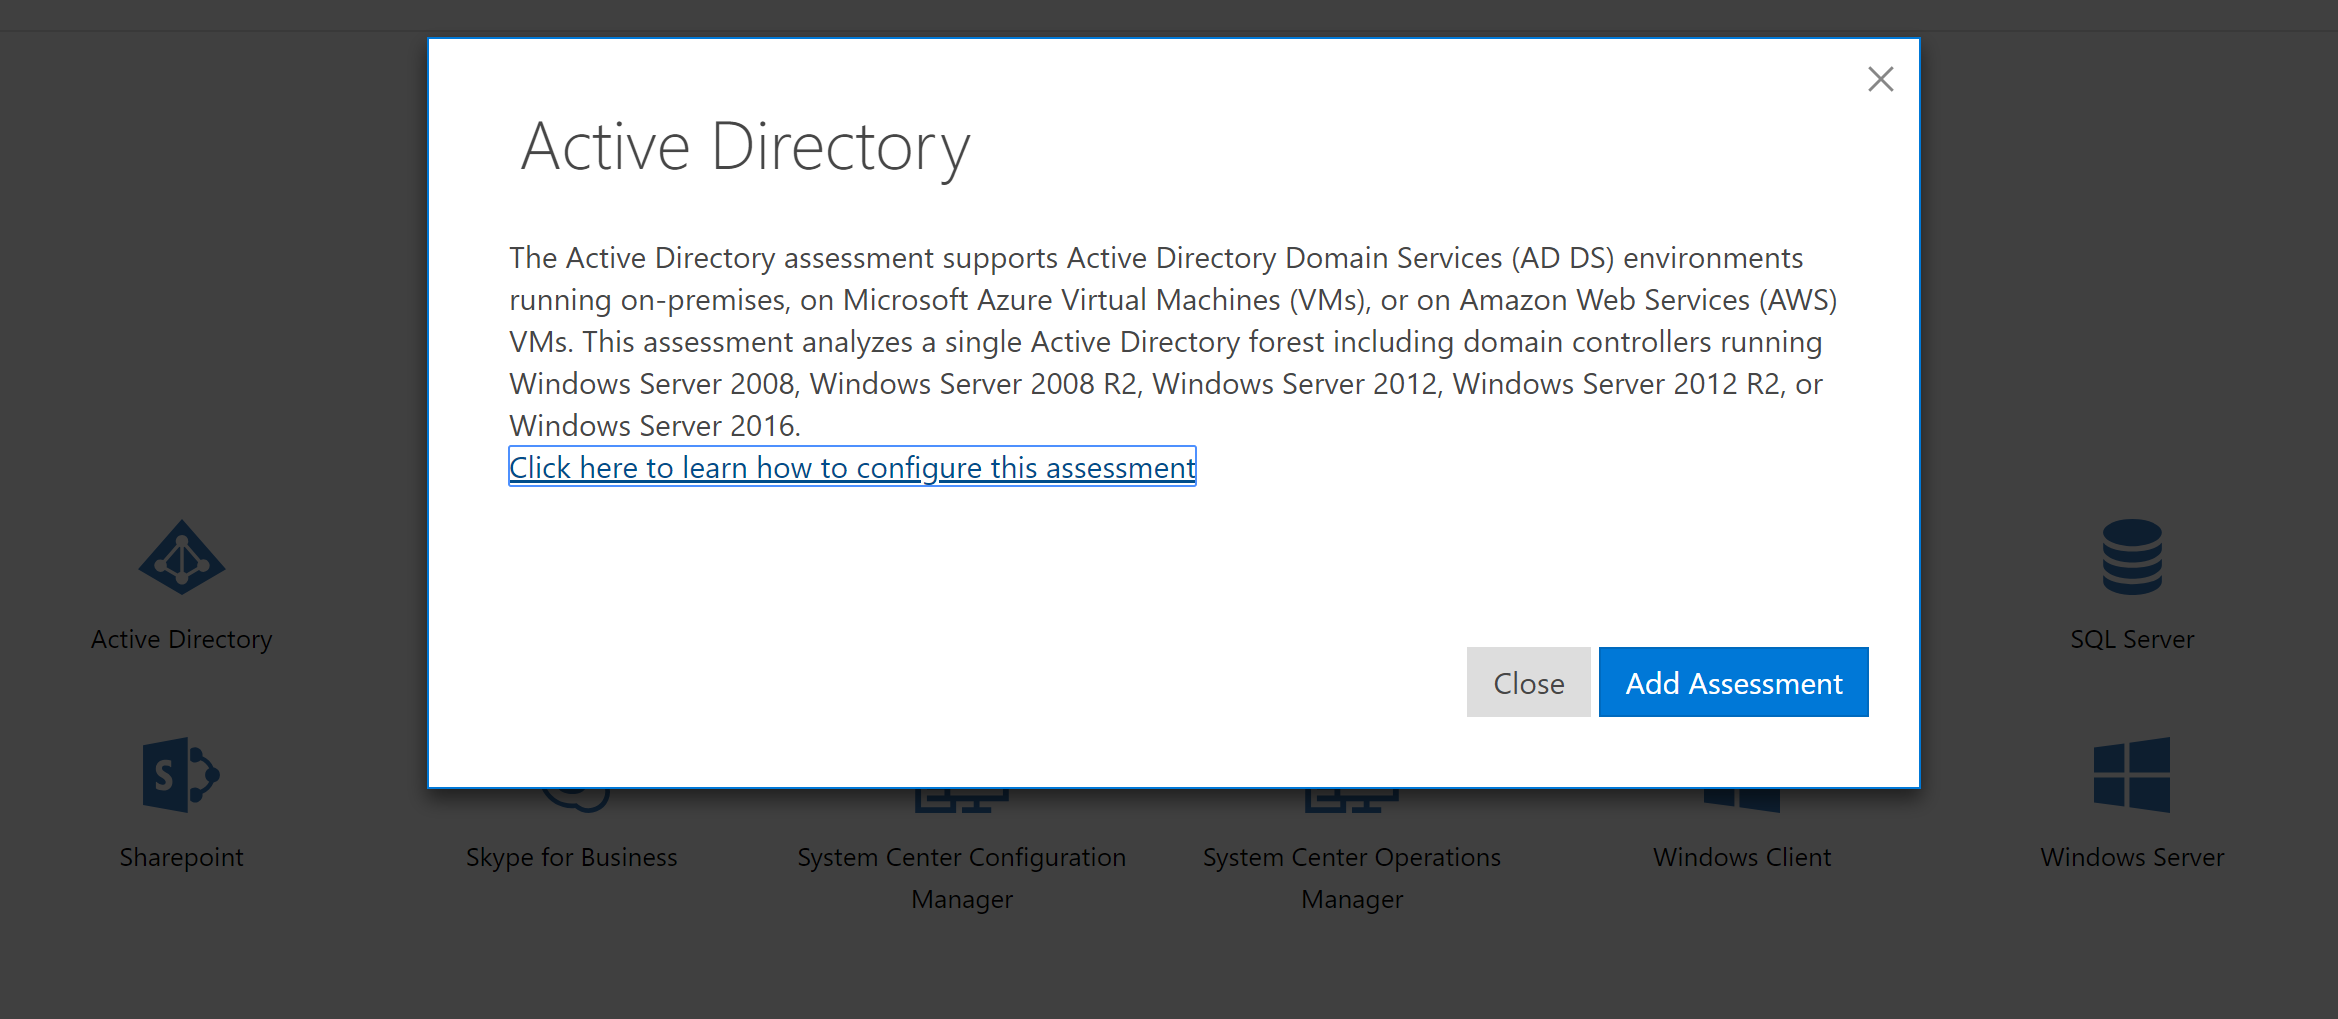 Active Directory Assessment description for supporting Entra ID service Environments.